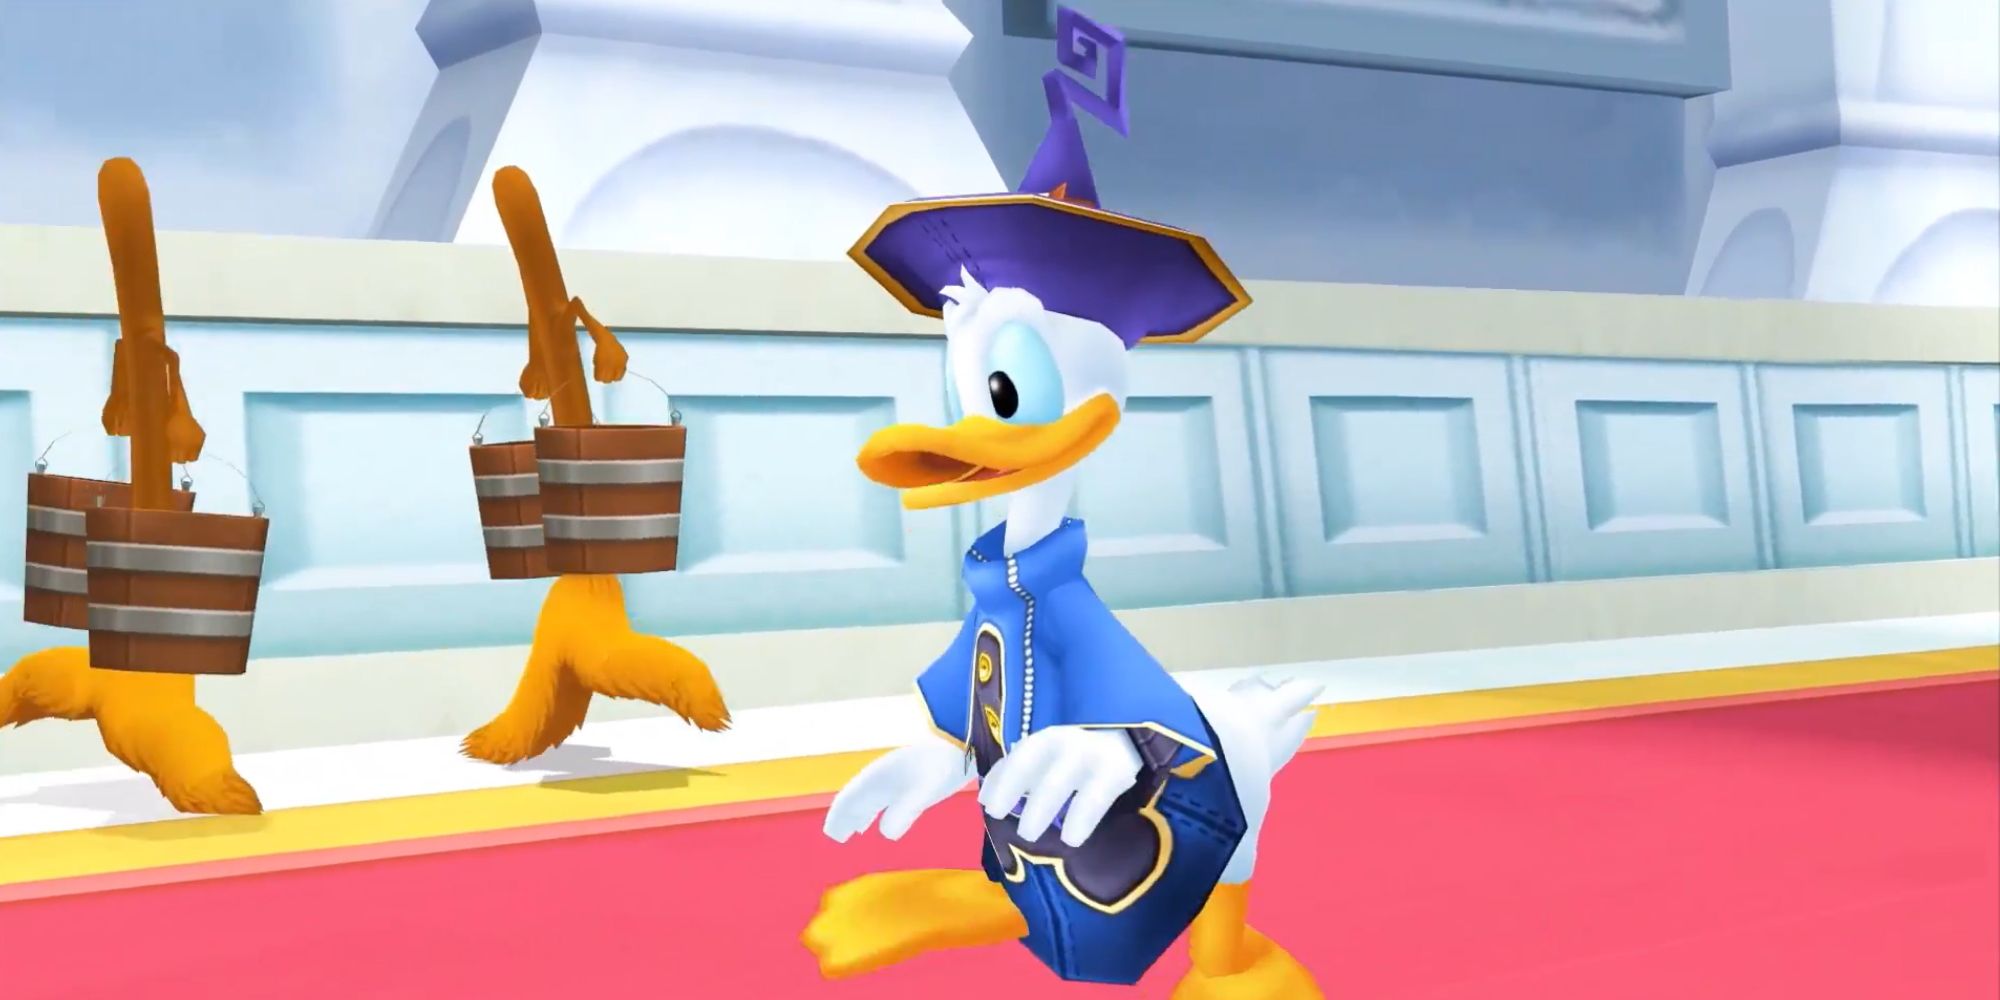 Donald Duck (as a Mage) walking down the hall